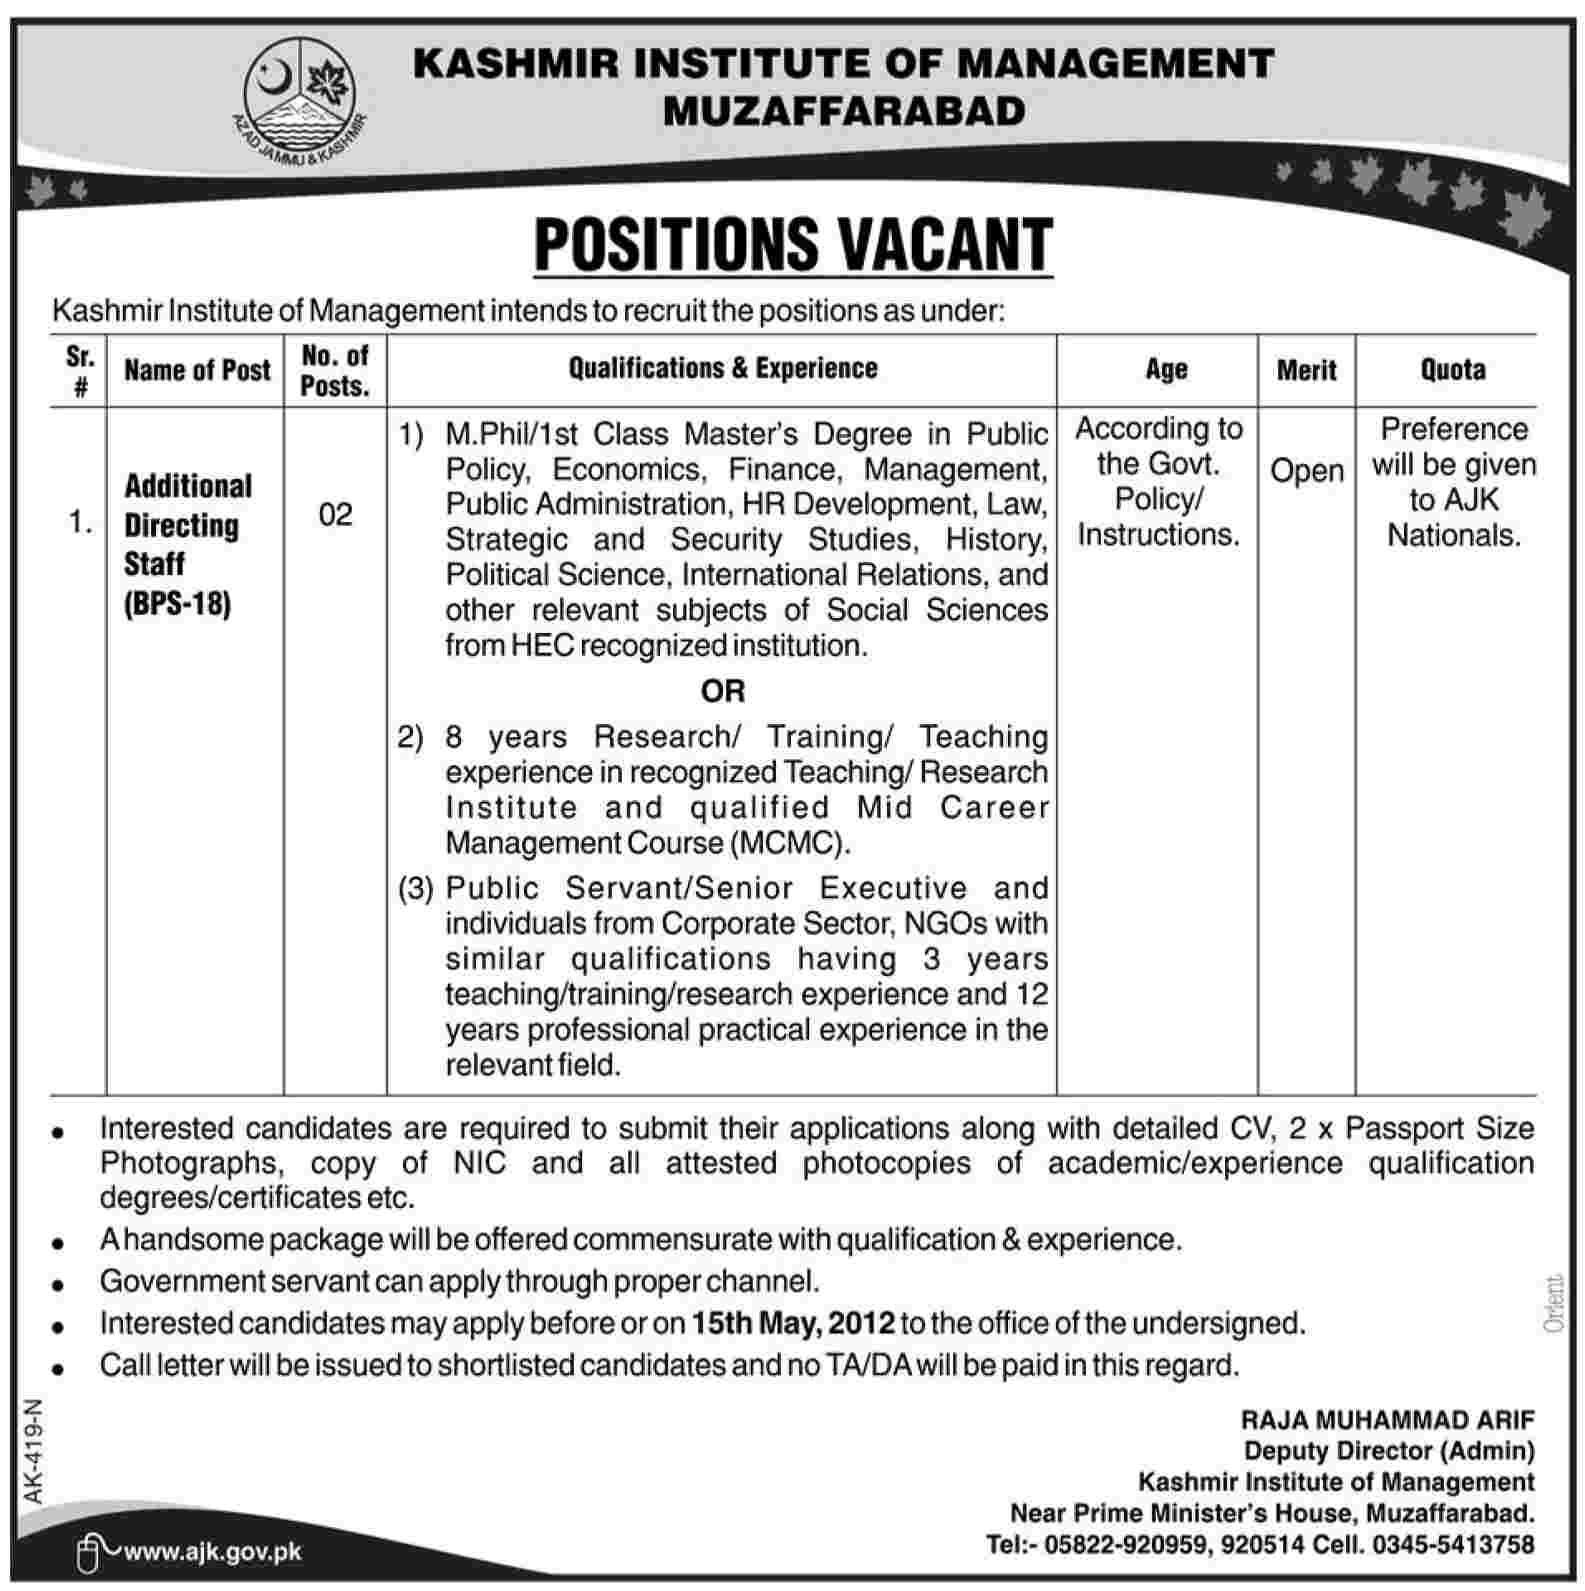 Job for Additional Directing Staff - BPS-18 at Kashmir Institute of Management